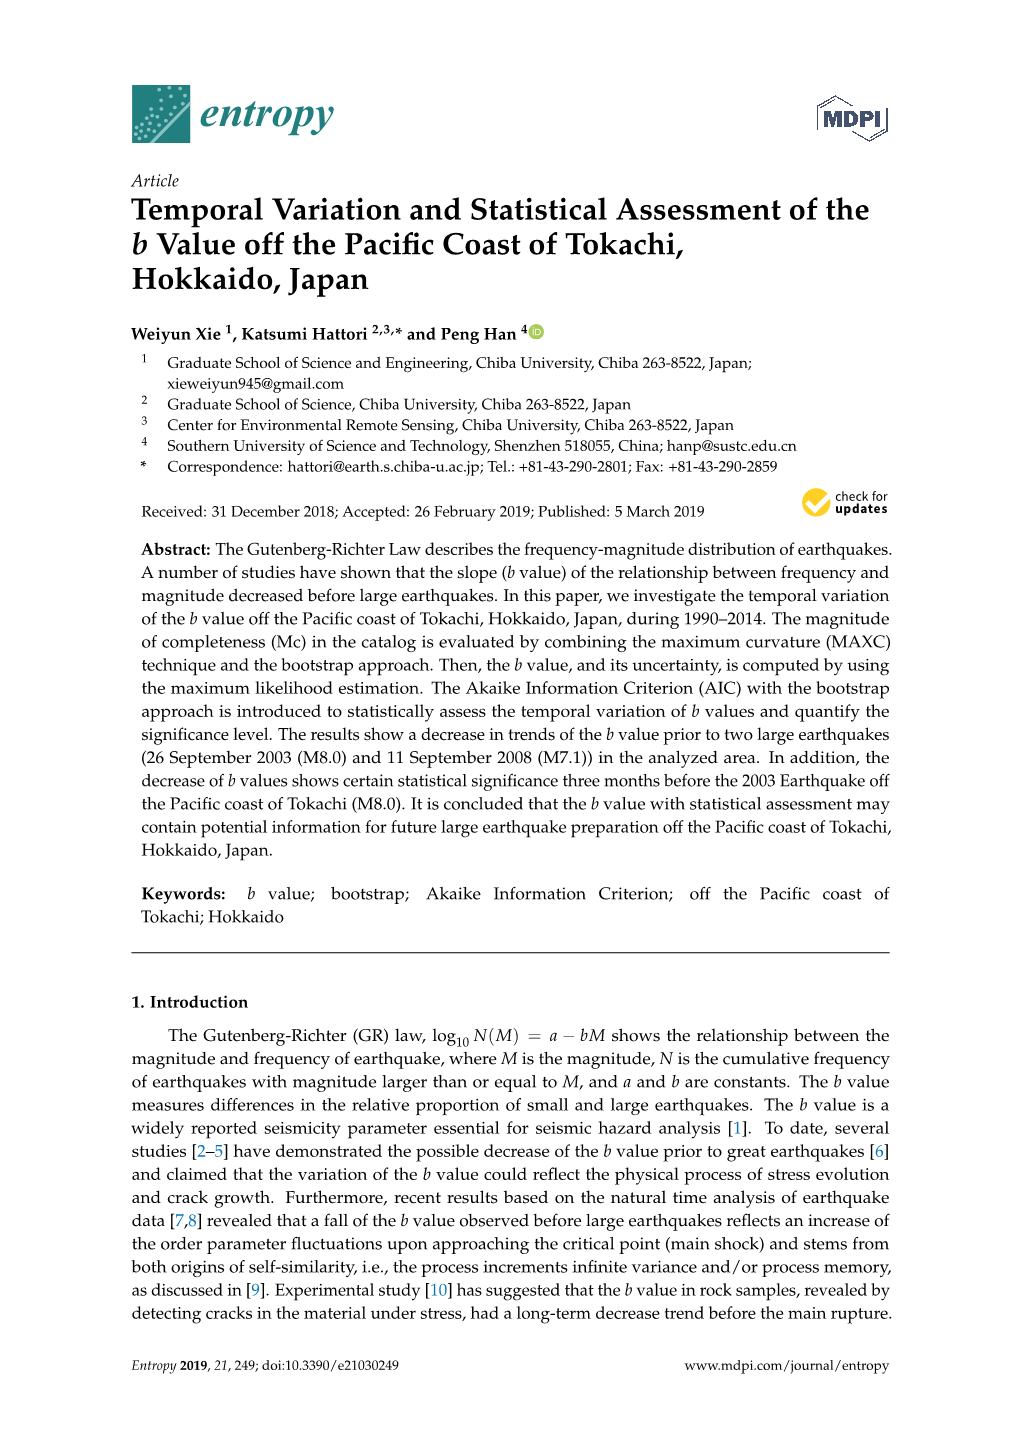 Temporal Variation and Statistical Assessment of the B Value Off the Paciﬁc Coast of Tokachi, Hokkaido, Japan